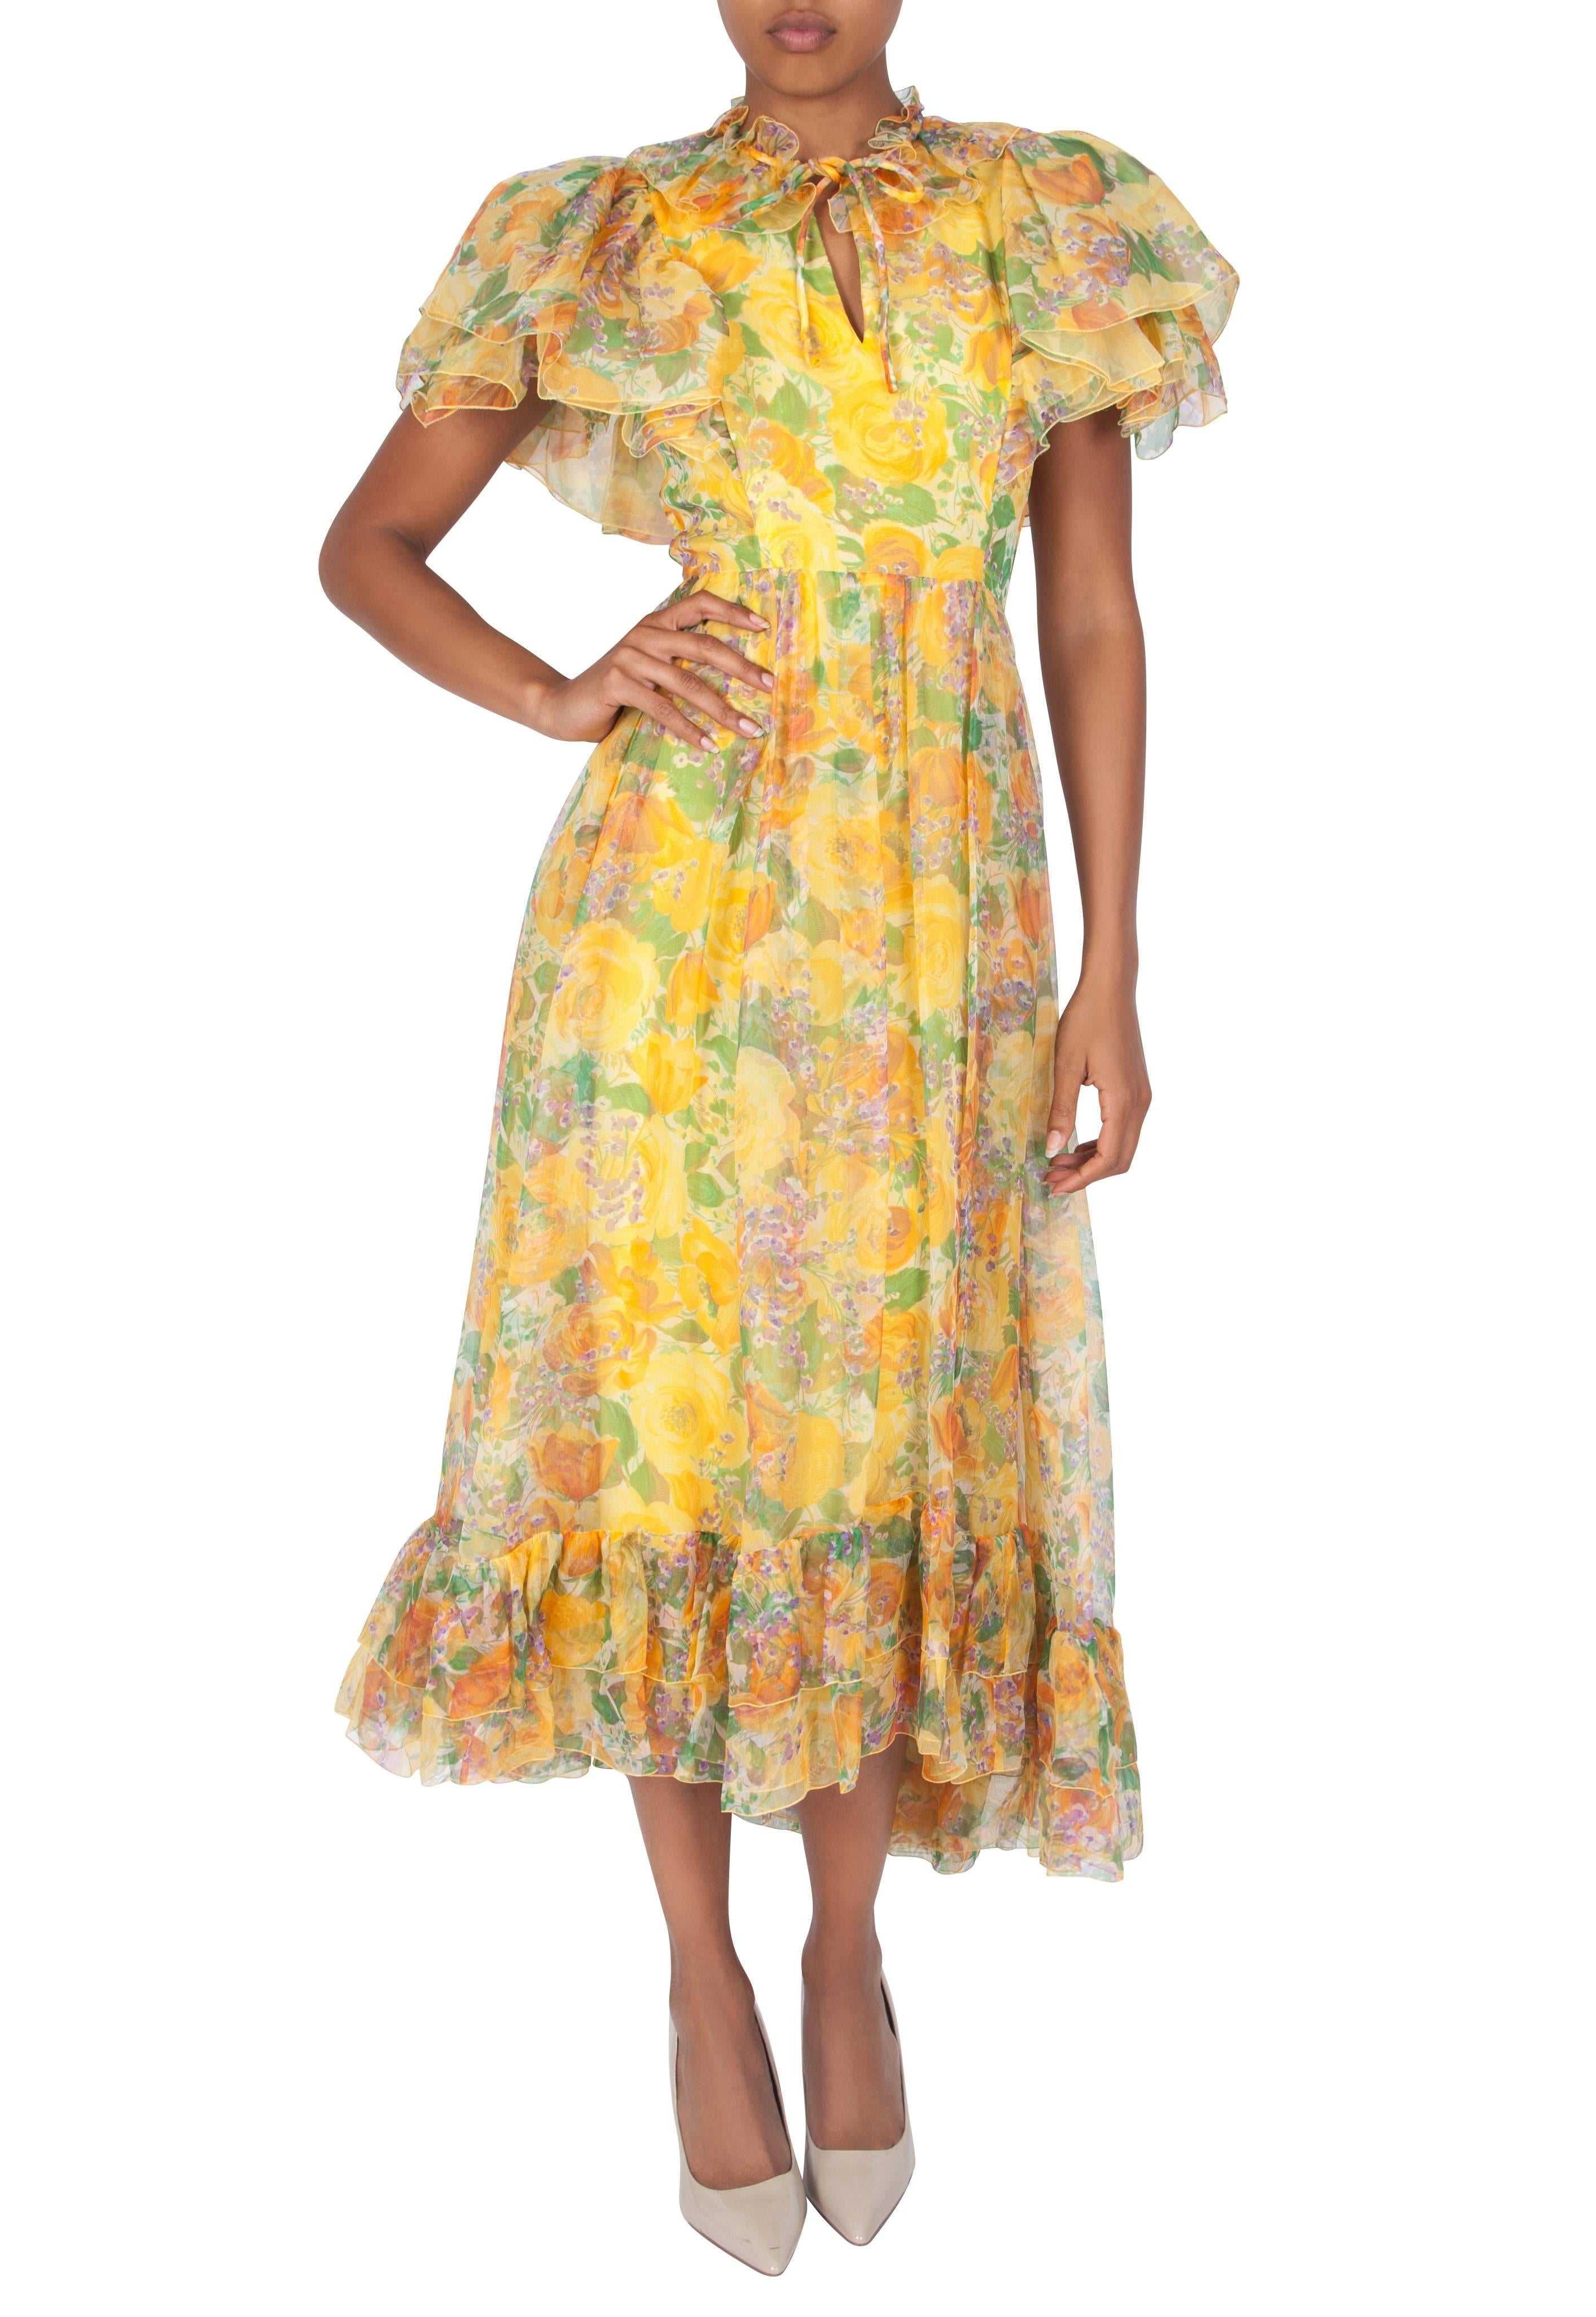 A 1970s yellow floral silk organza dress by London couturier Harald. The full-length dress is fitted to the waist and features a V neckline, ruffled neckline trim and a necktie that allows the dress to be closed at the neckline, forming a keyhole